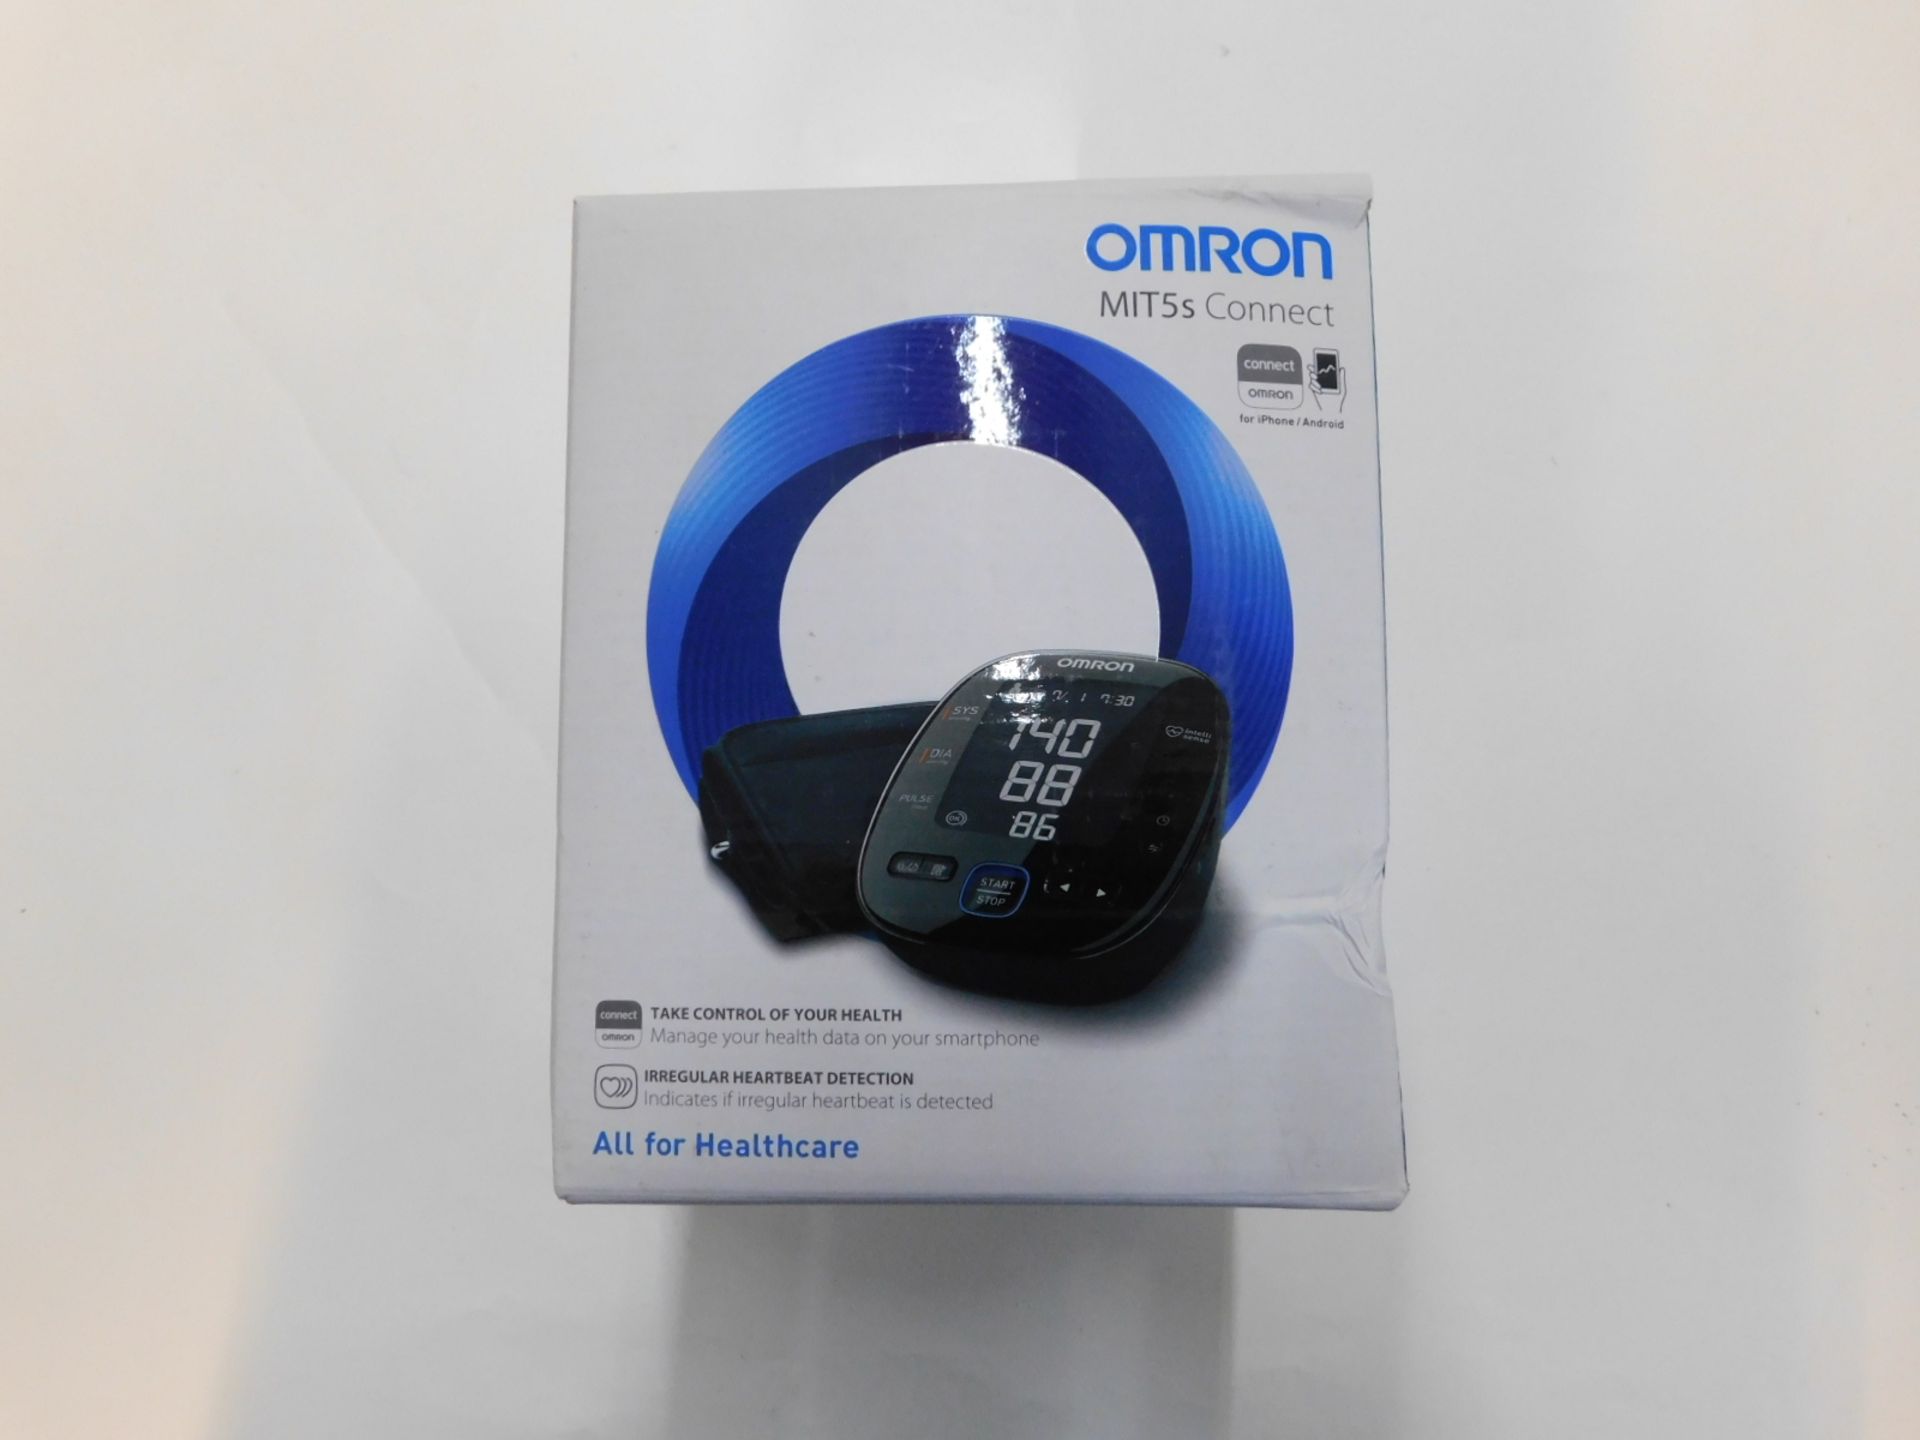 1 BOXED OMRON MIT5S CONNECT BLOOD PRESSURE MONITOR RRP Â£129